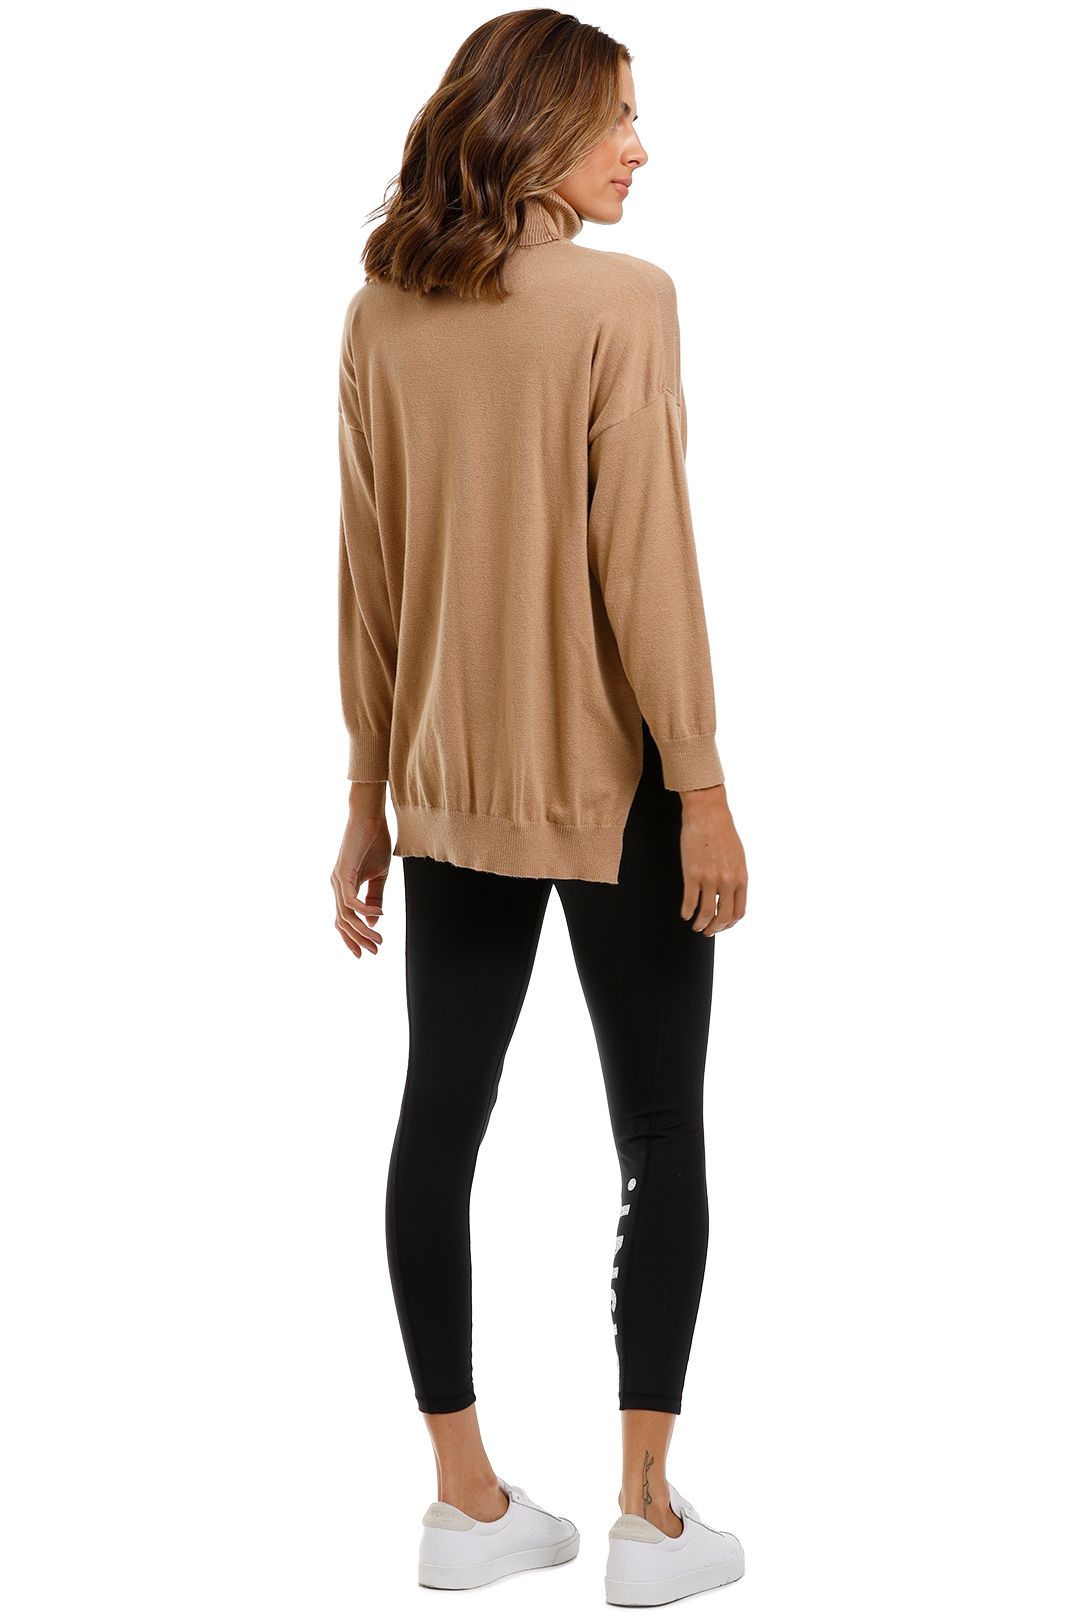 MNG Contrasting Bands Sweater Tan Long Sleeve